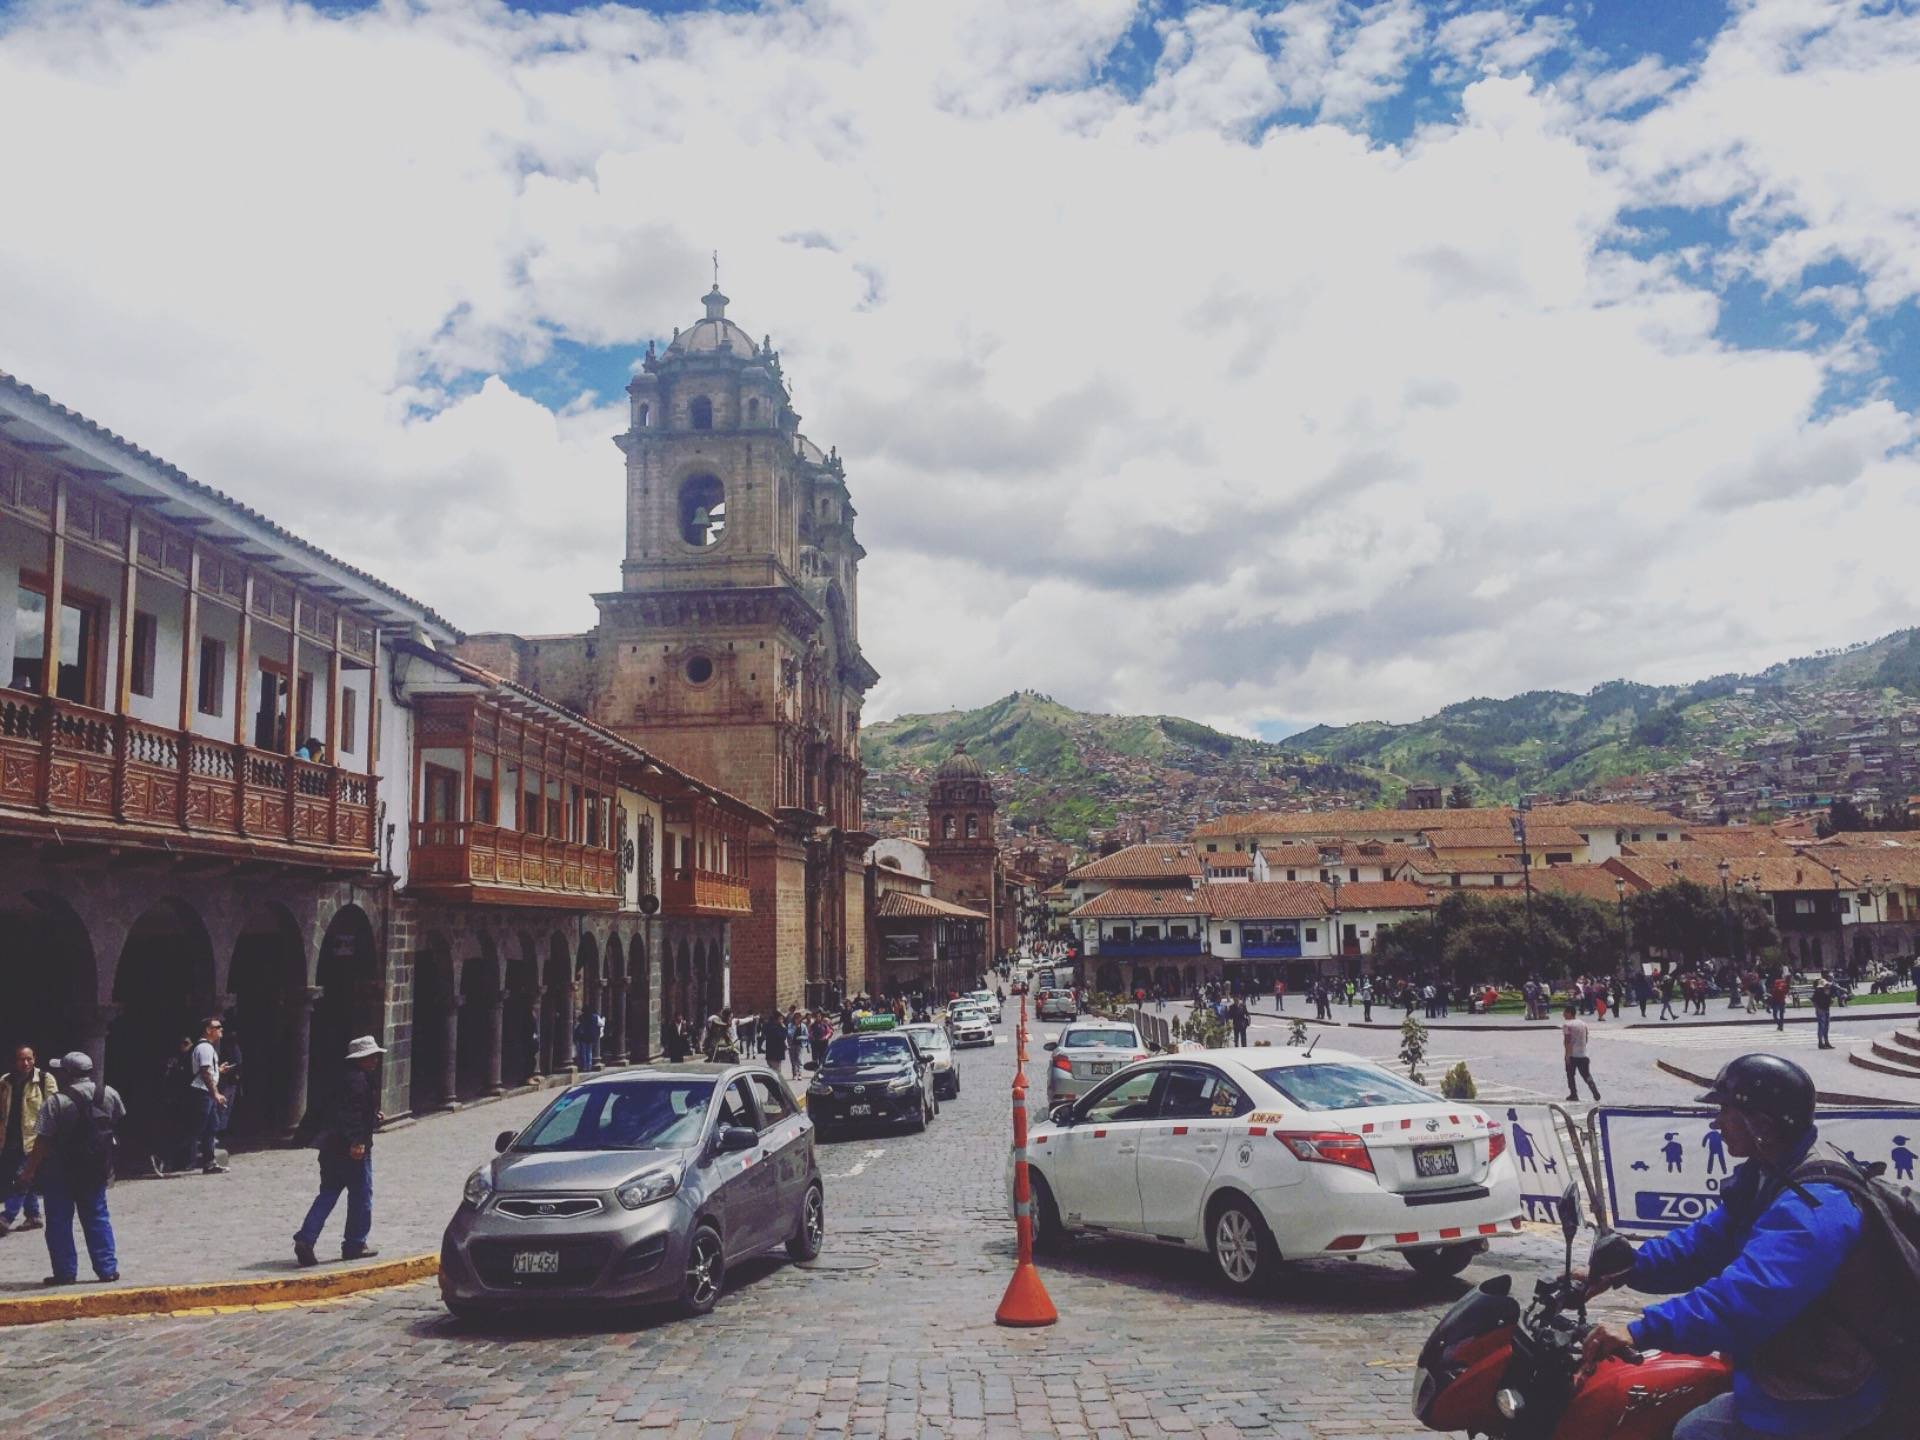 Plaza de Armas - An epitome of what Cusco is